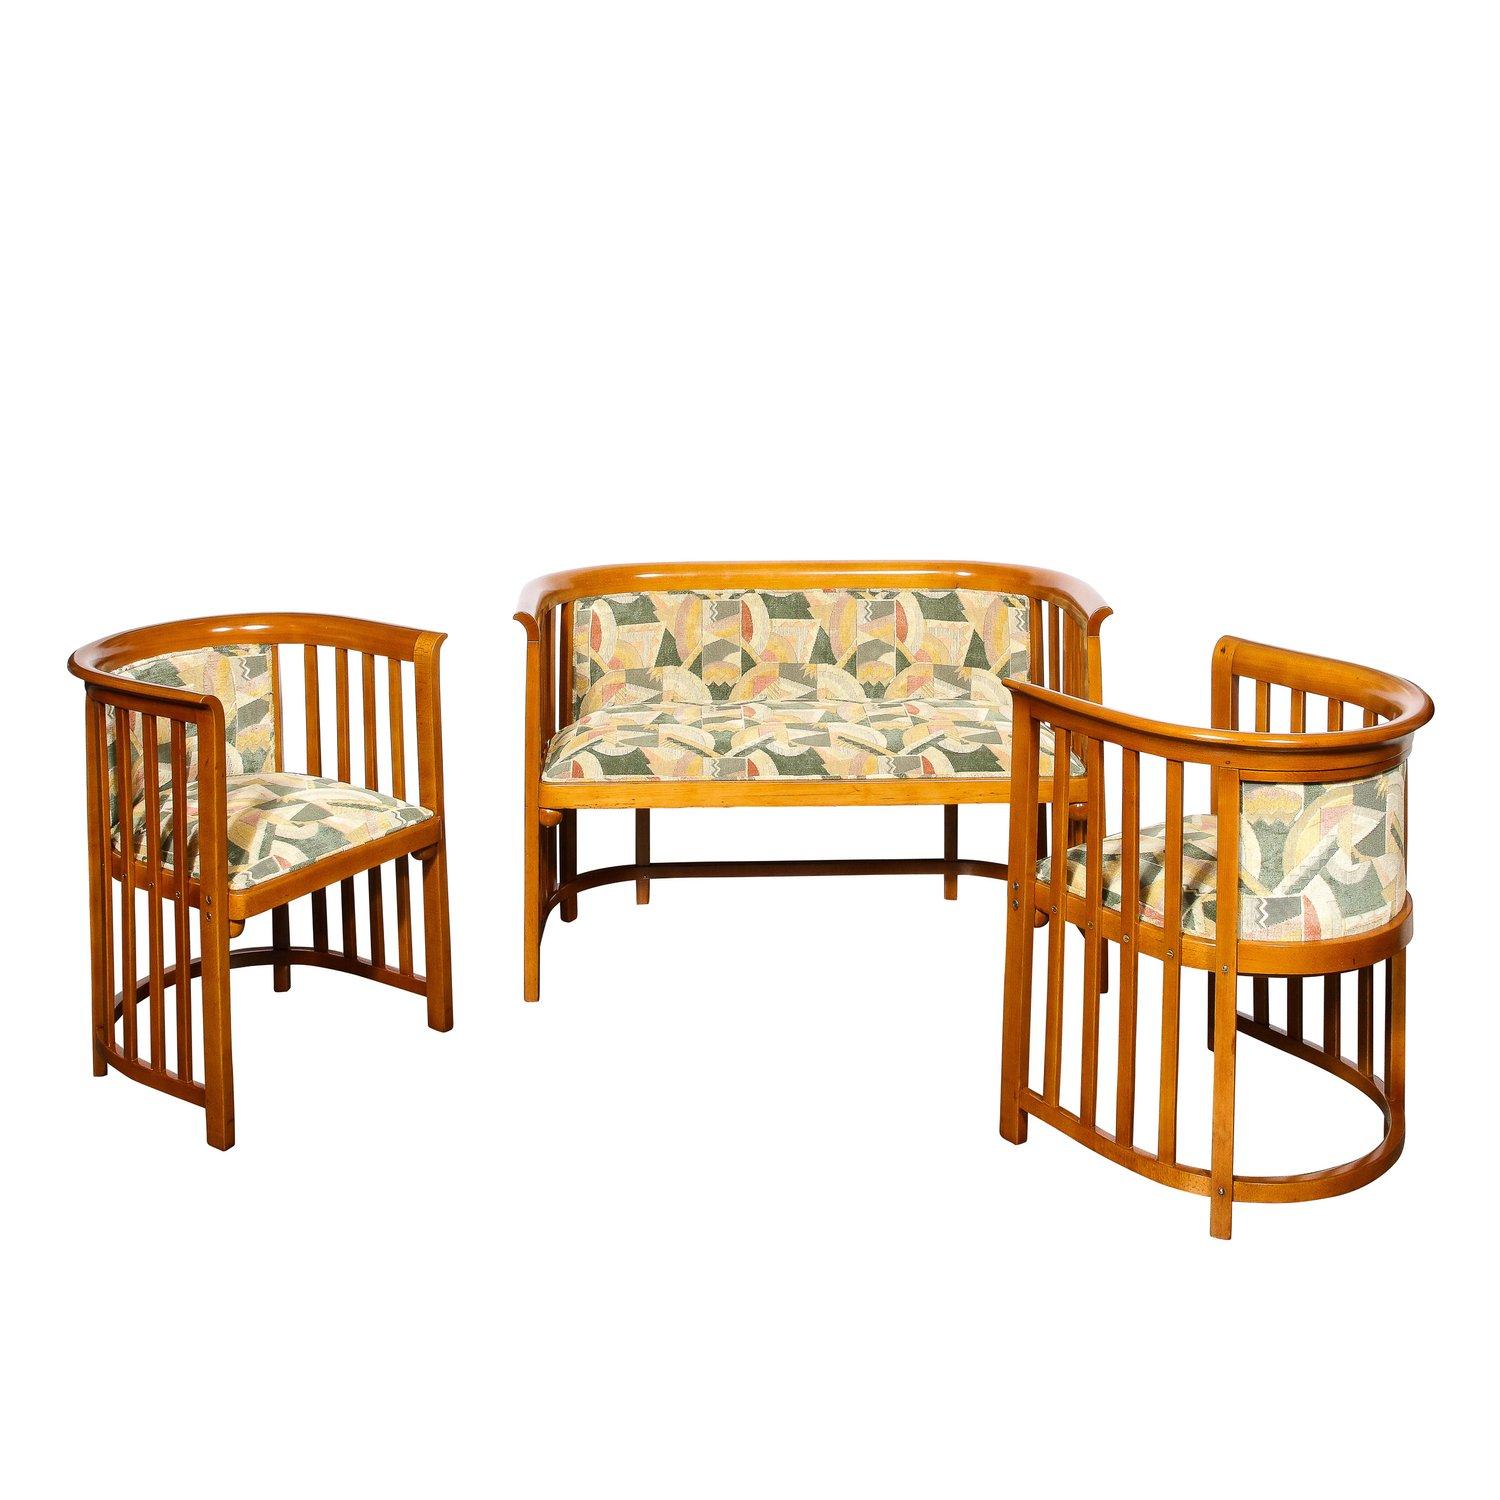 This elegant and refined three piece living room set, consisting of two chairs and a settee were designed by the legendary Josef Hoffman in Austria circa 1905. They feature concave demilune open form silhouettes with evenly spaced vertical supports